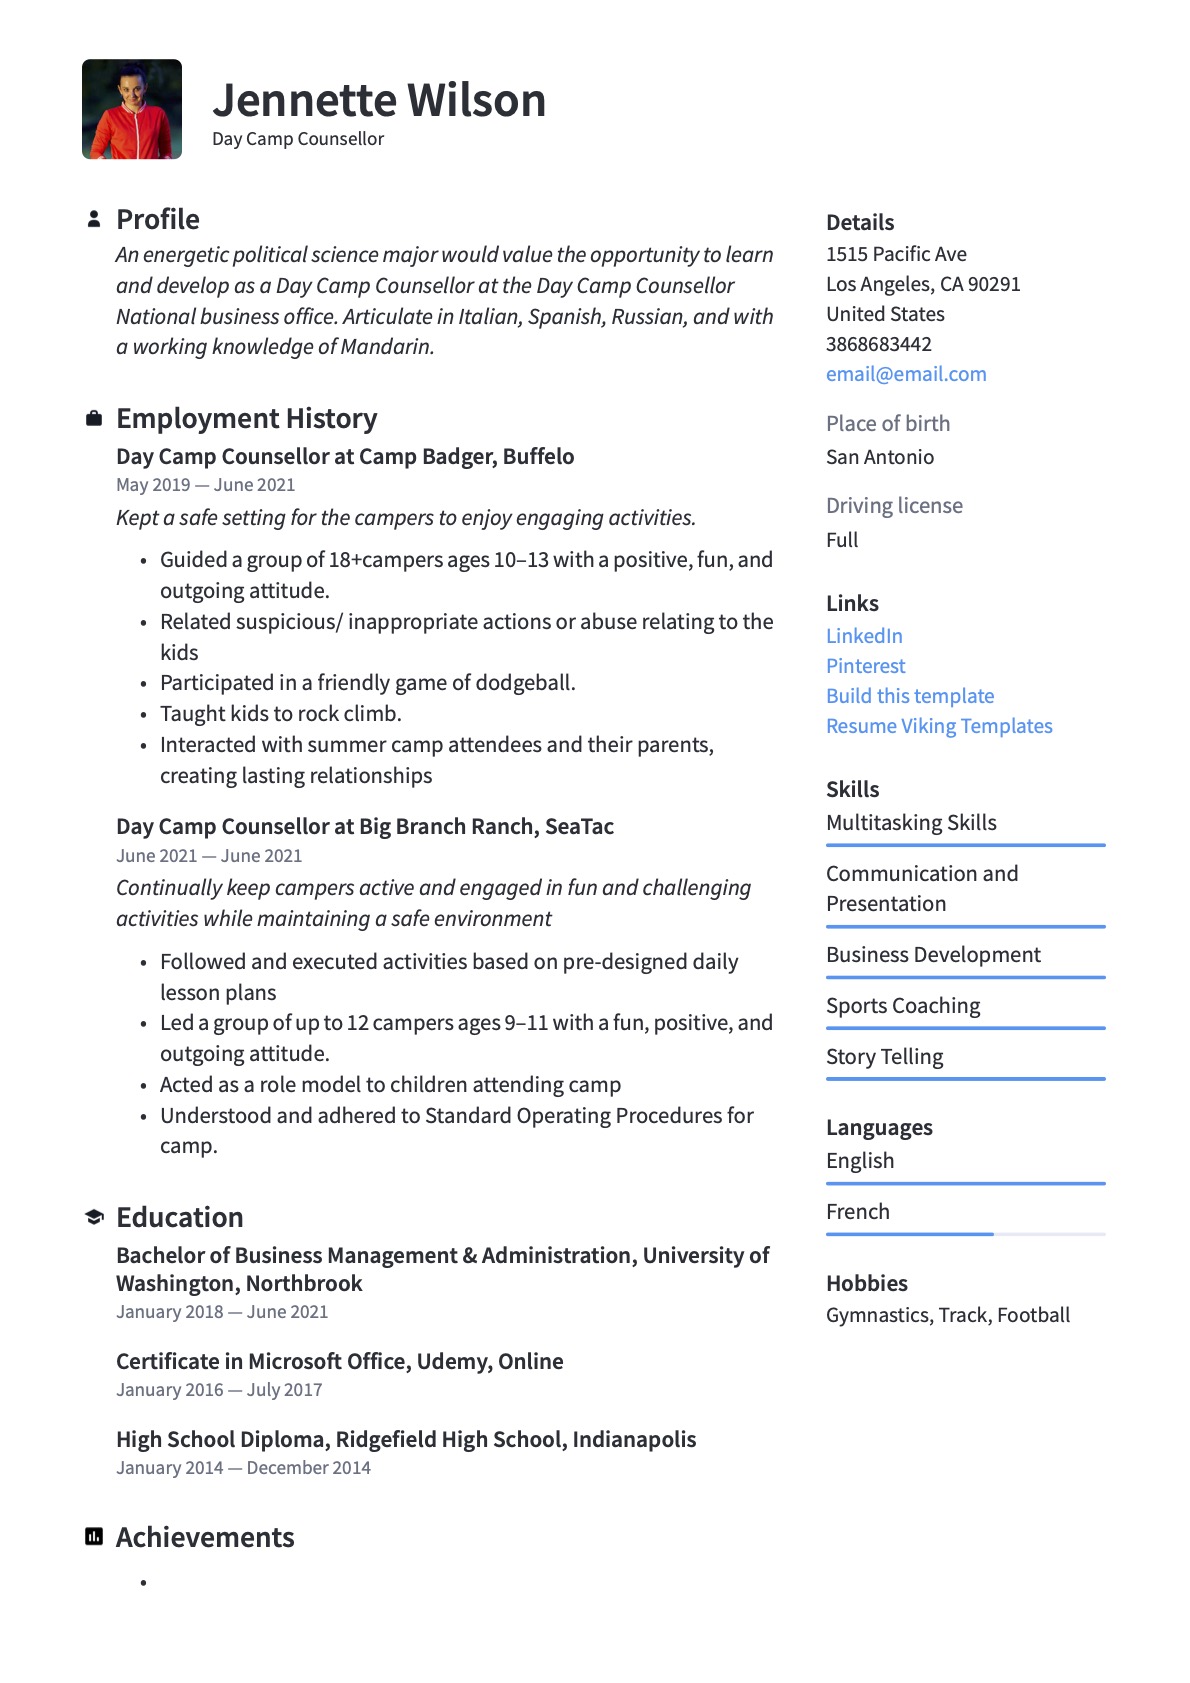 Professional Day Camp Counsellor Resume Template